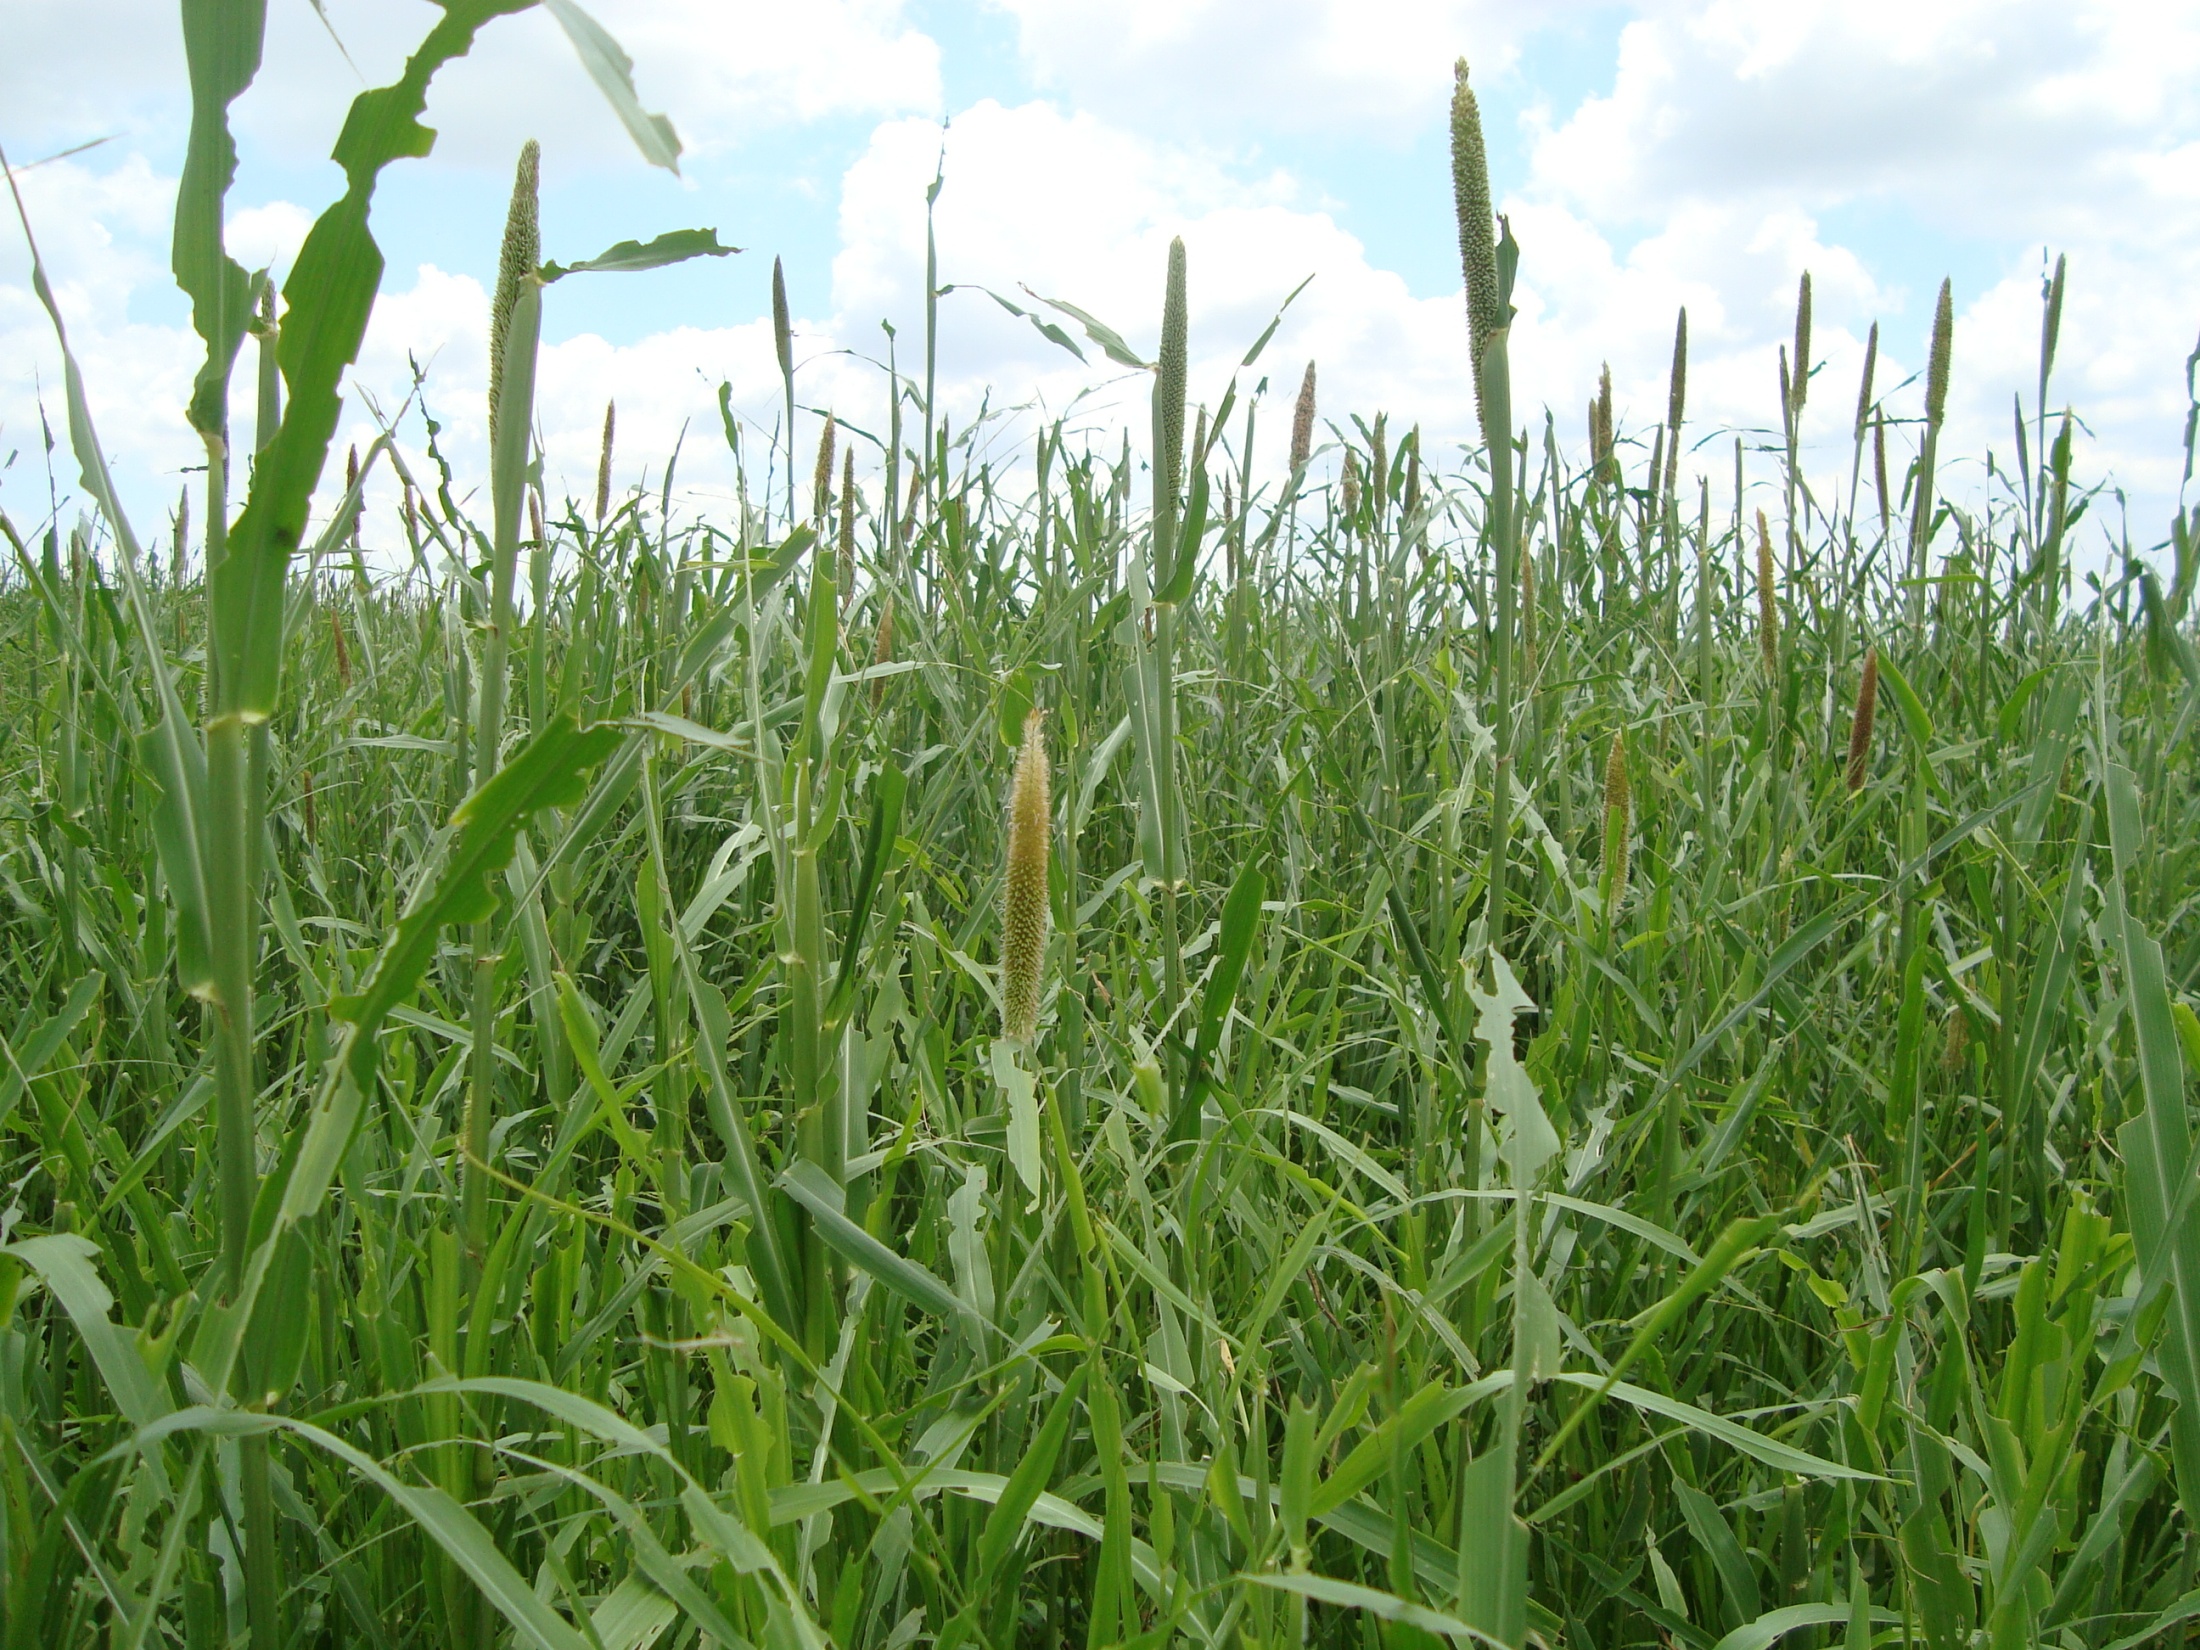 Detail of millet area with Spodoptera close to soybean desiccation and sowing